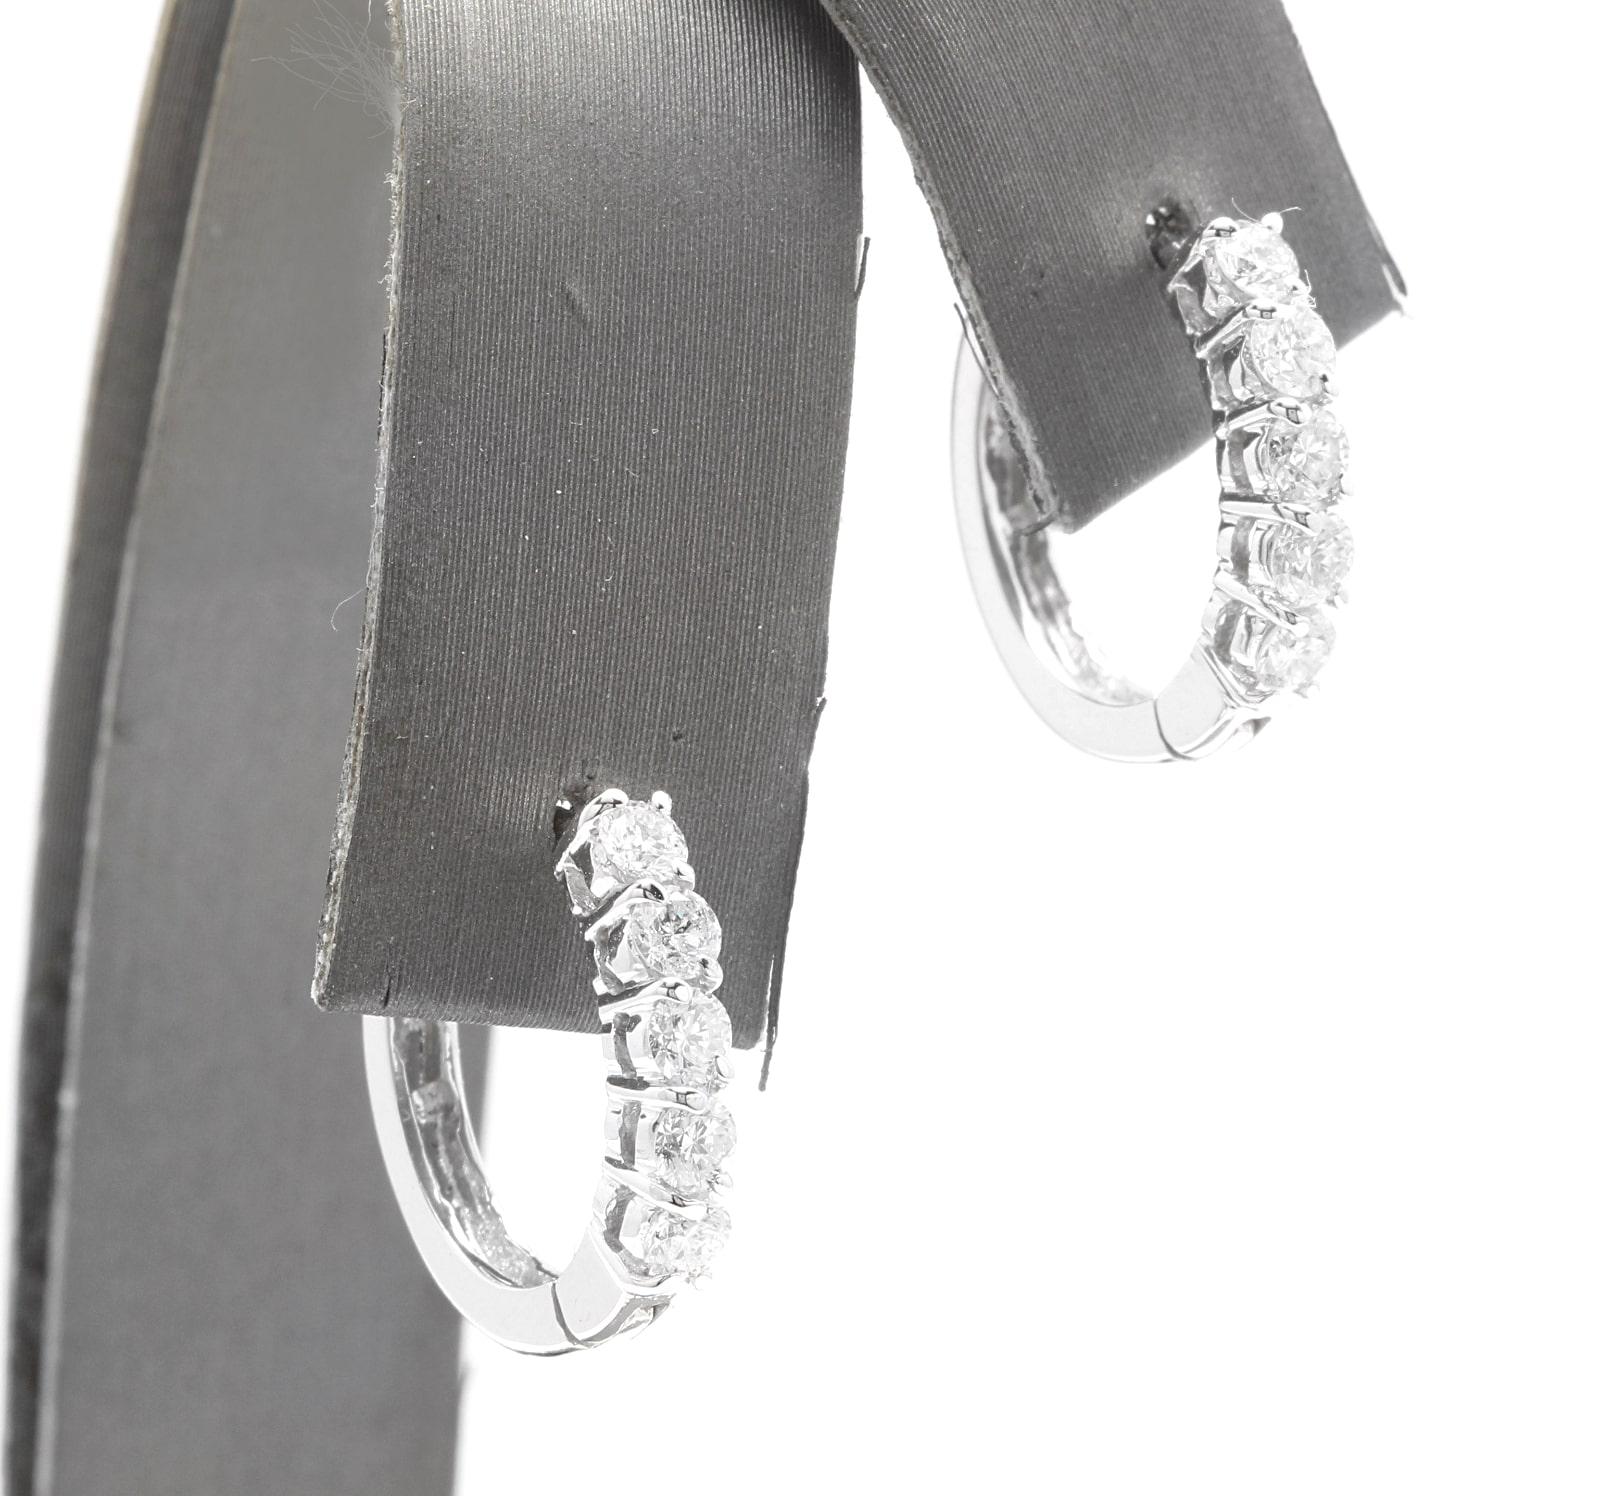 Exquisite 0.80 Carats Natural Diamond 14K Solid White Gold Hoop Earrings

Amazing looking piece! 

Suggested Replacement Value $3,500.00

Total Natural Round Cut White Diamonds Weight: Approx. 0.80 Carats (color G-H / Clarity SI1-SI2)

Total